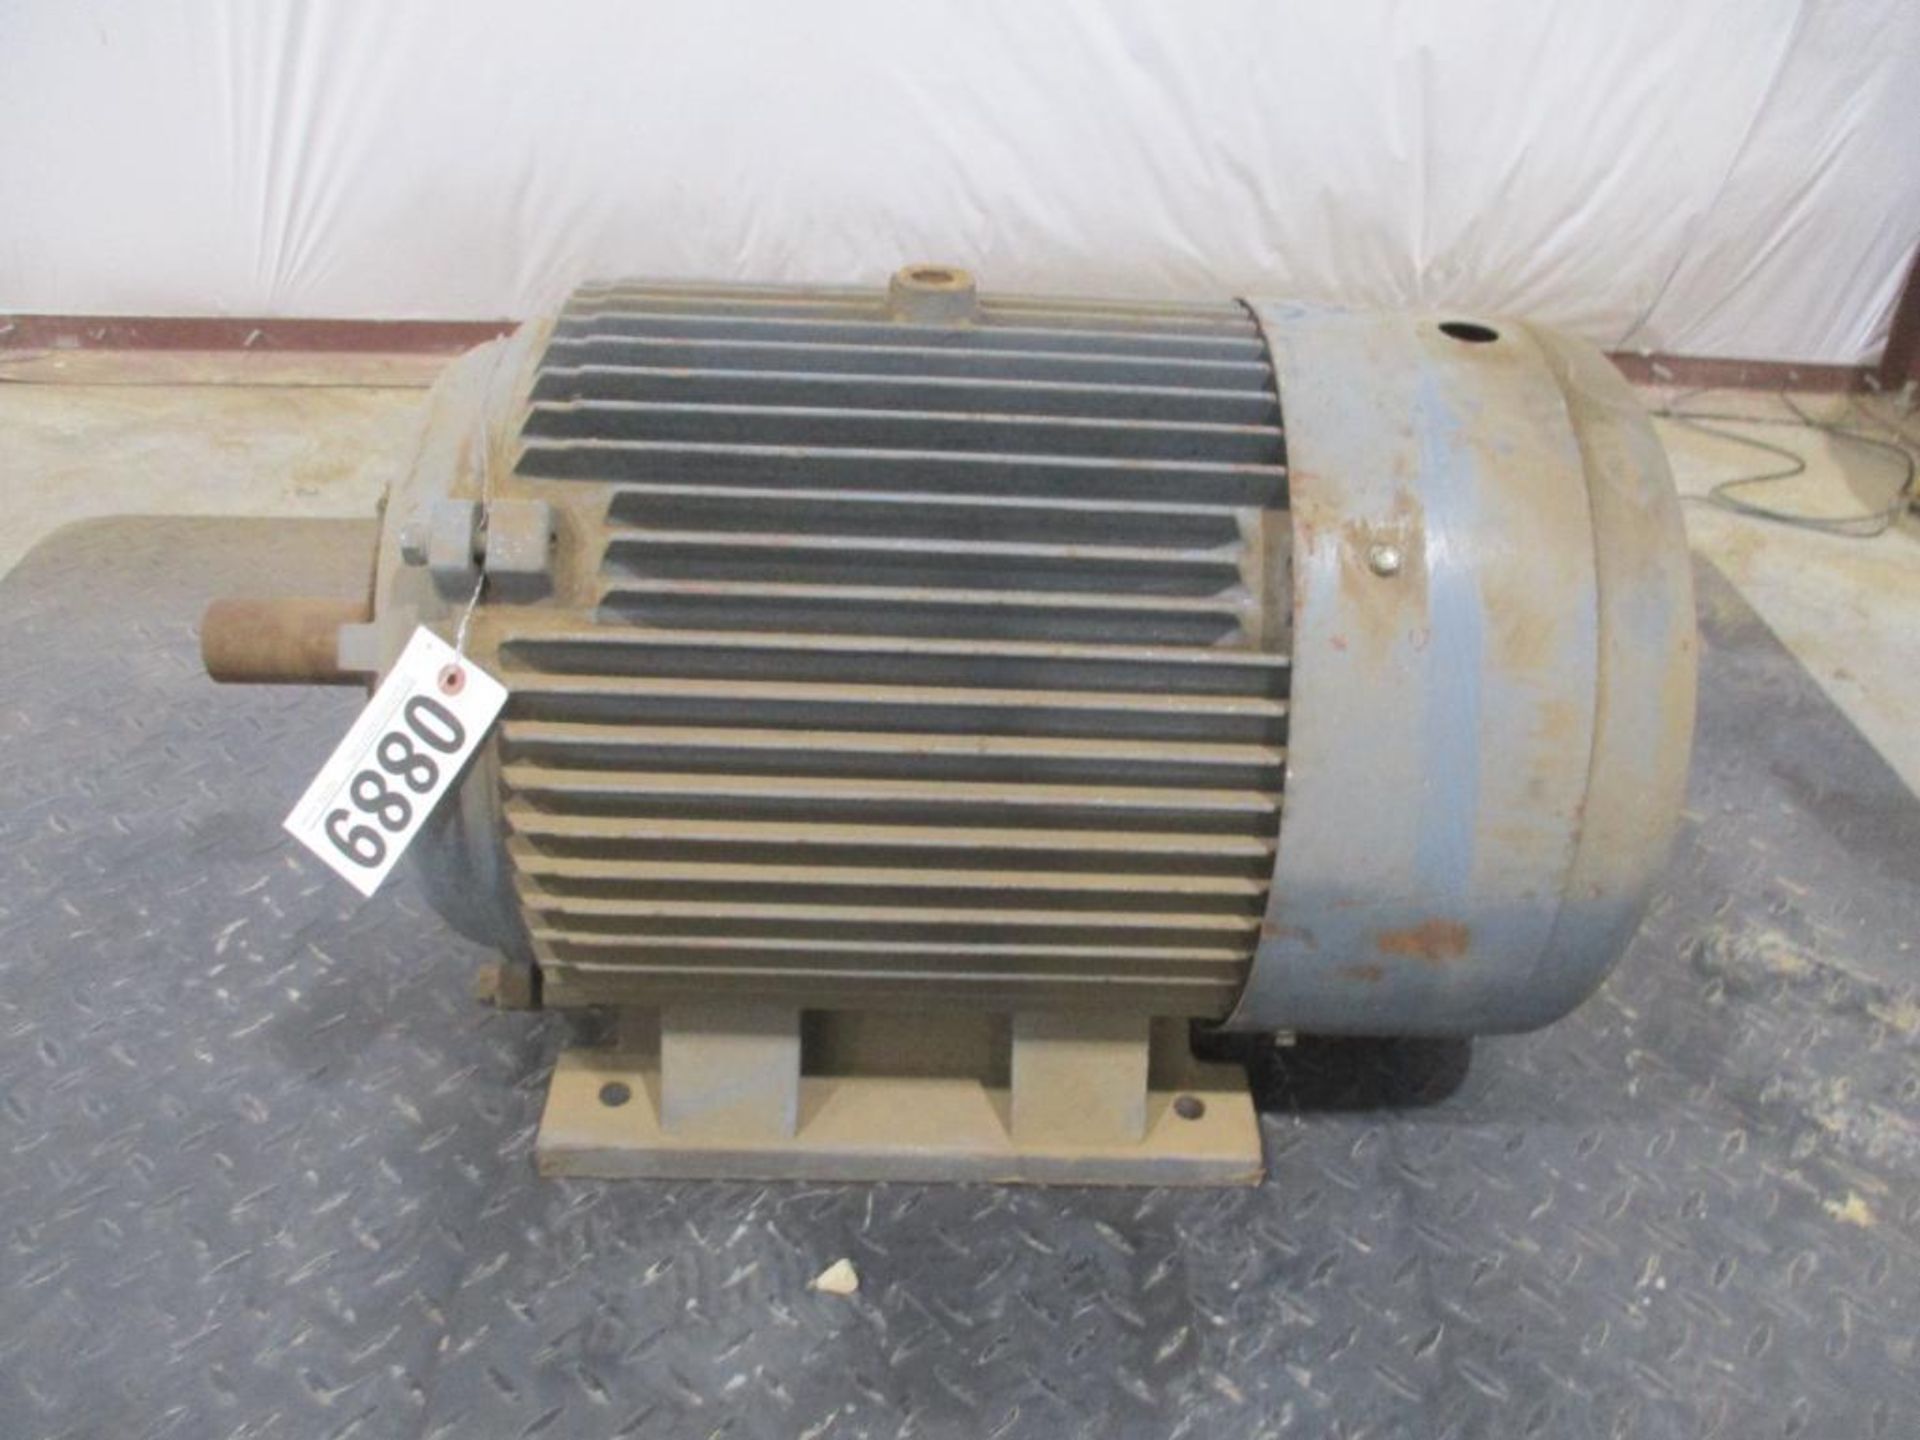 TECO AMERICA 3 PHASE 50HP 3545RPM 326TS FRAME A/C MOTOR P/N 6030001, 538# lbs (There will be a $40 R